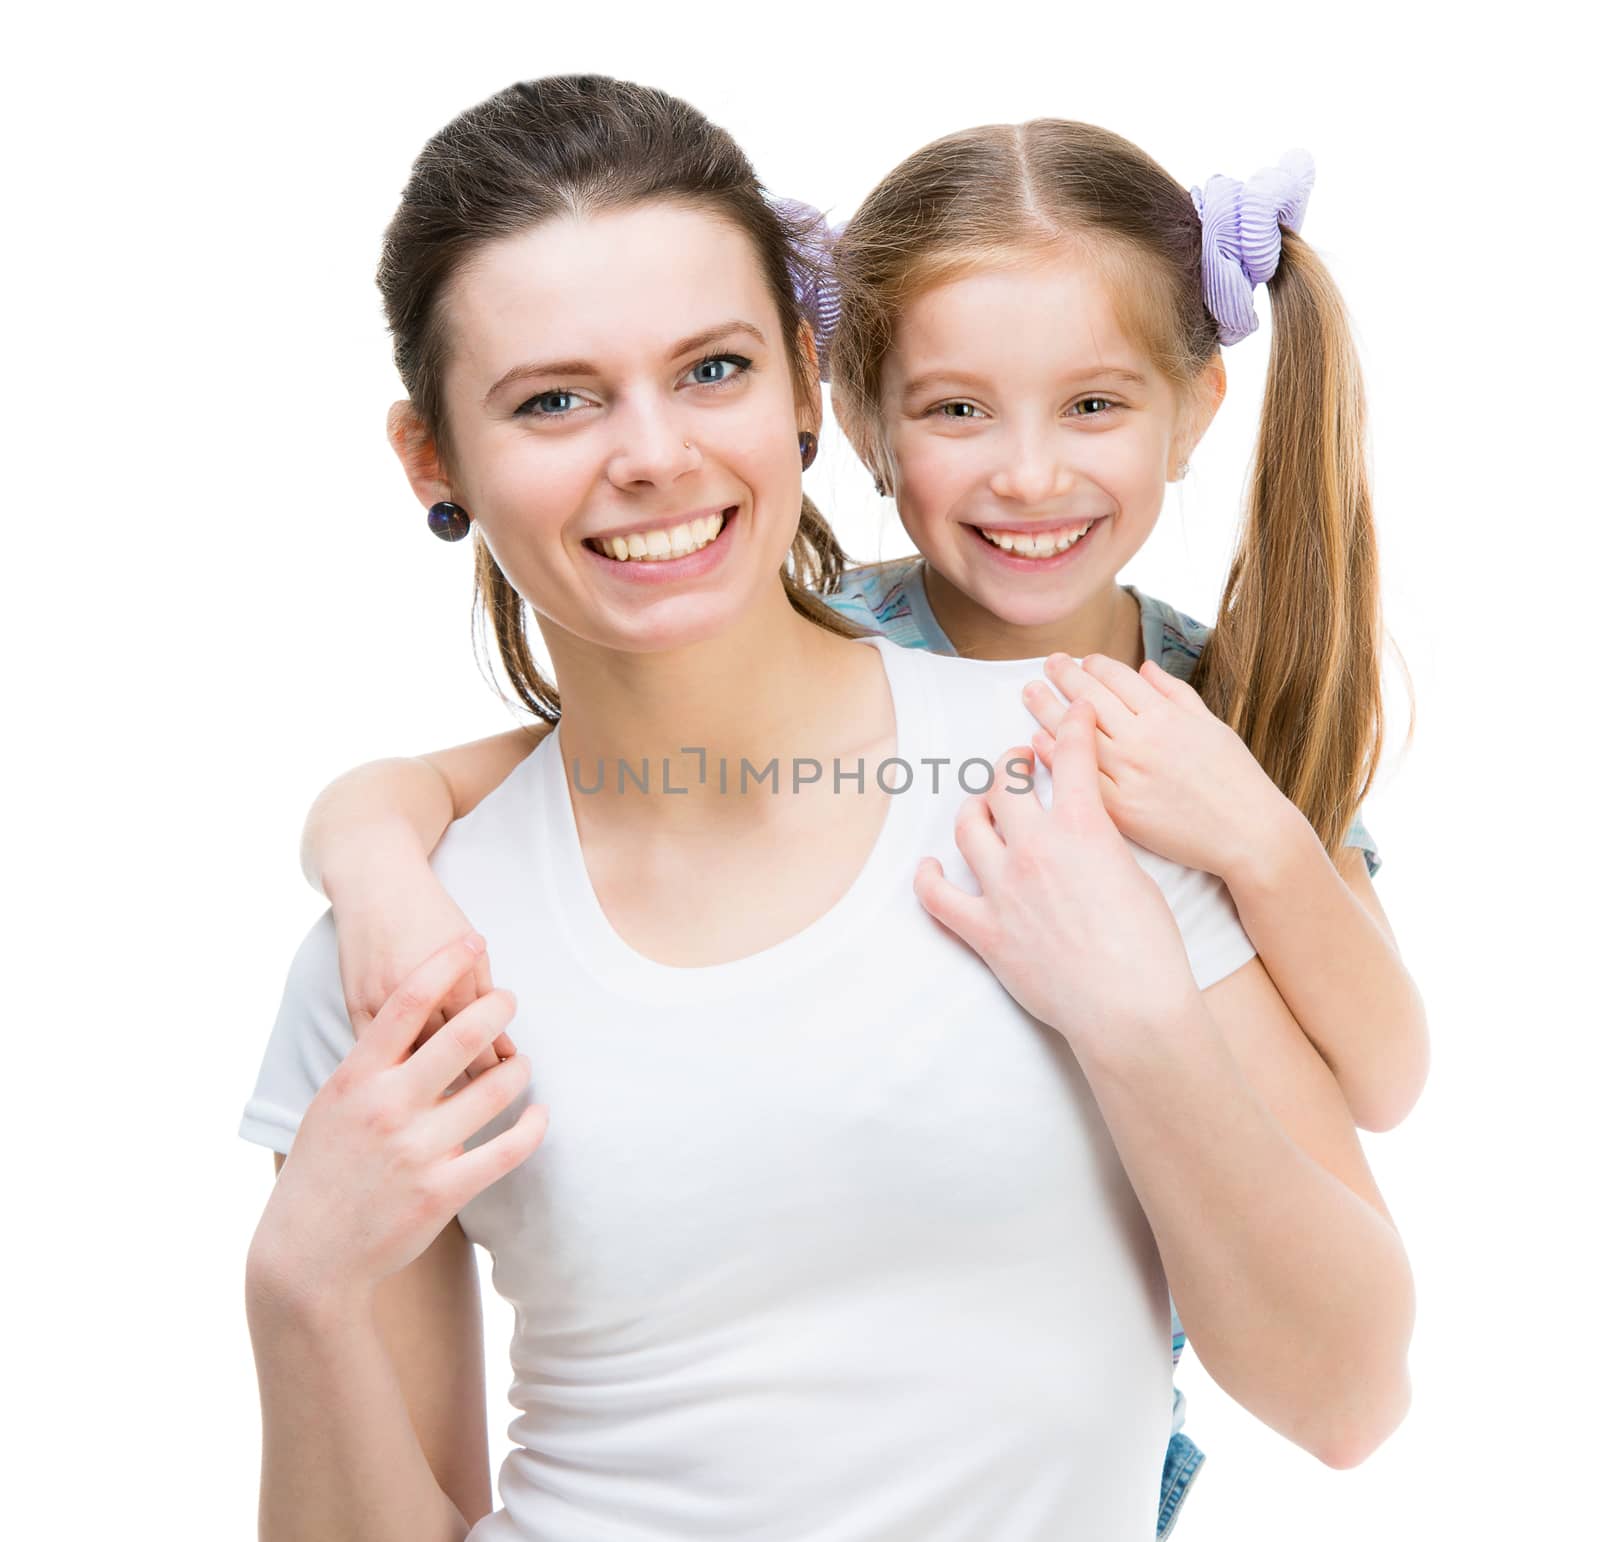 Smiling little girl embracing sister isolated over white background